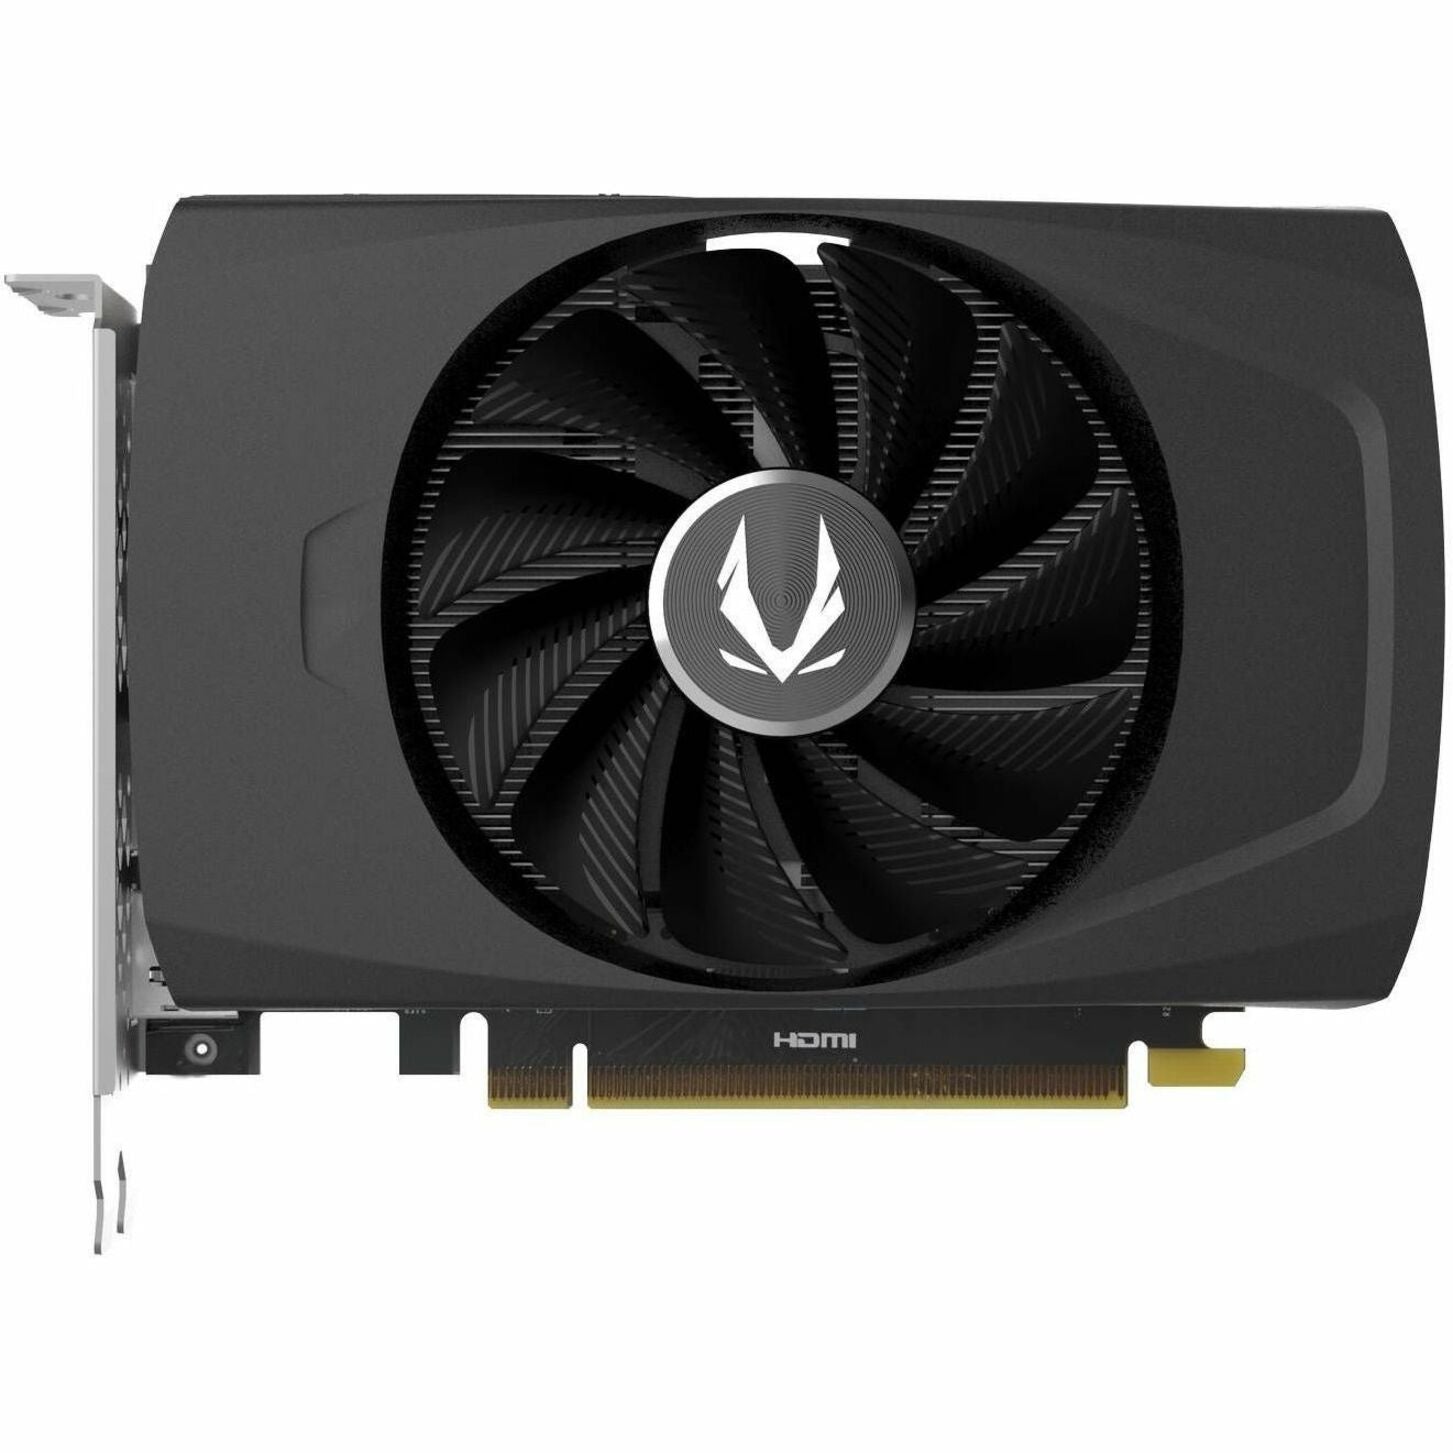 Zotac ZT-D40600G-10L GAMING GeForce RTX 4060 8GB SOLO Graphic Card, High Performance Gaming Experience